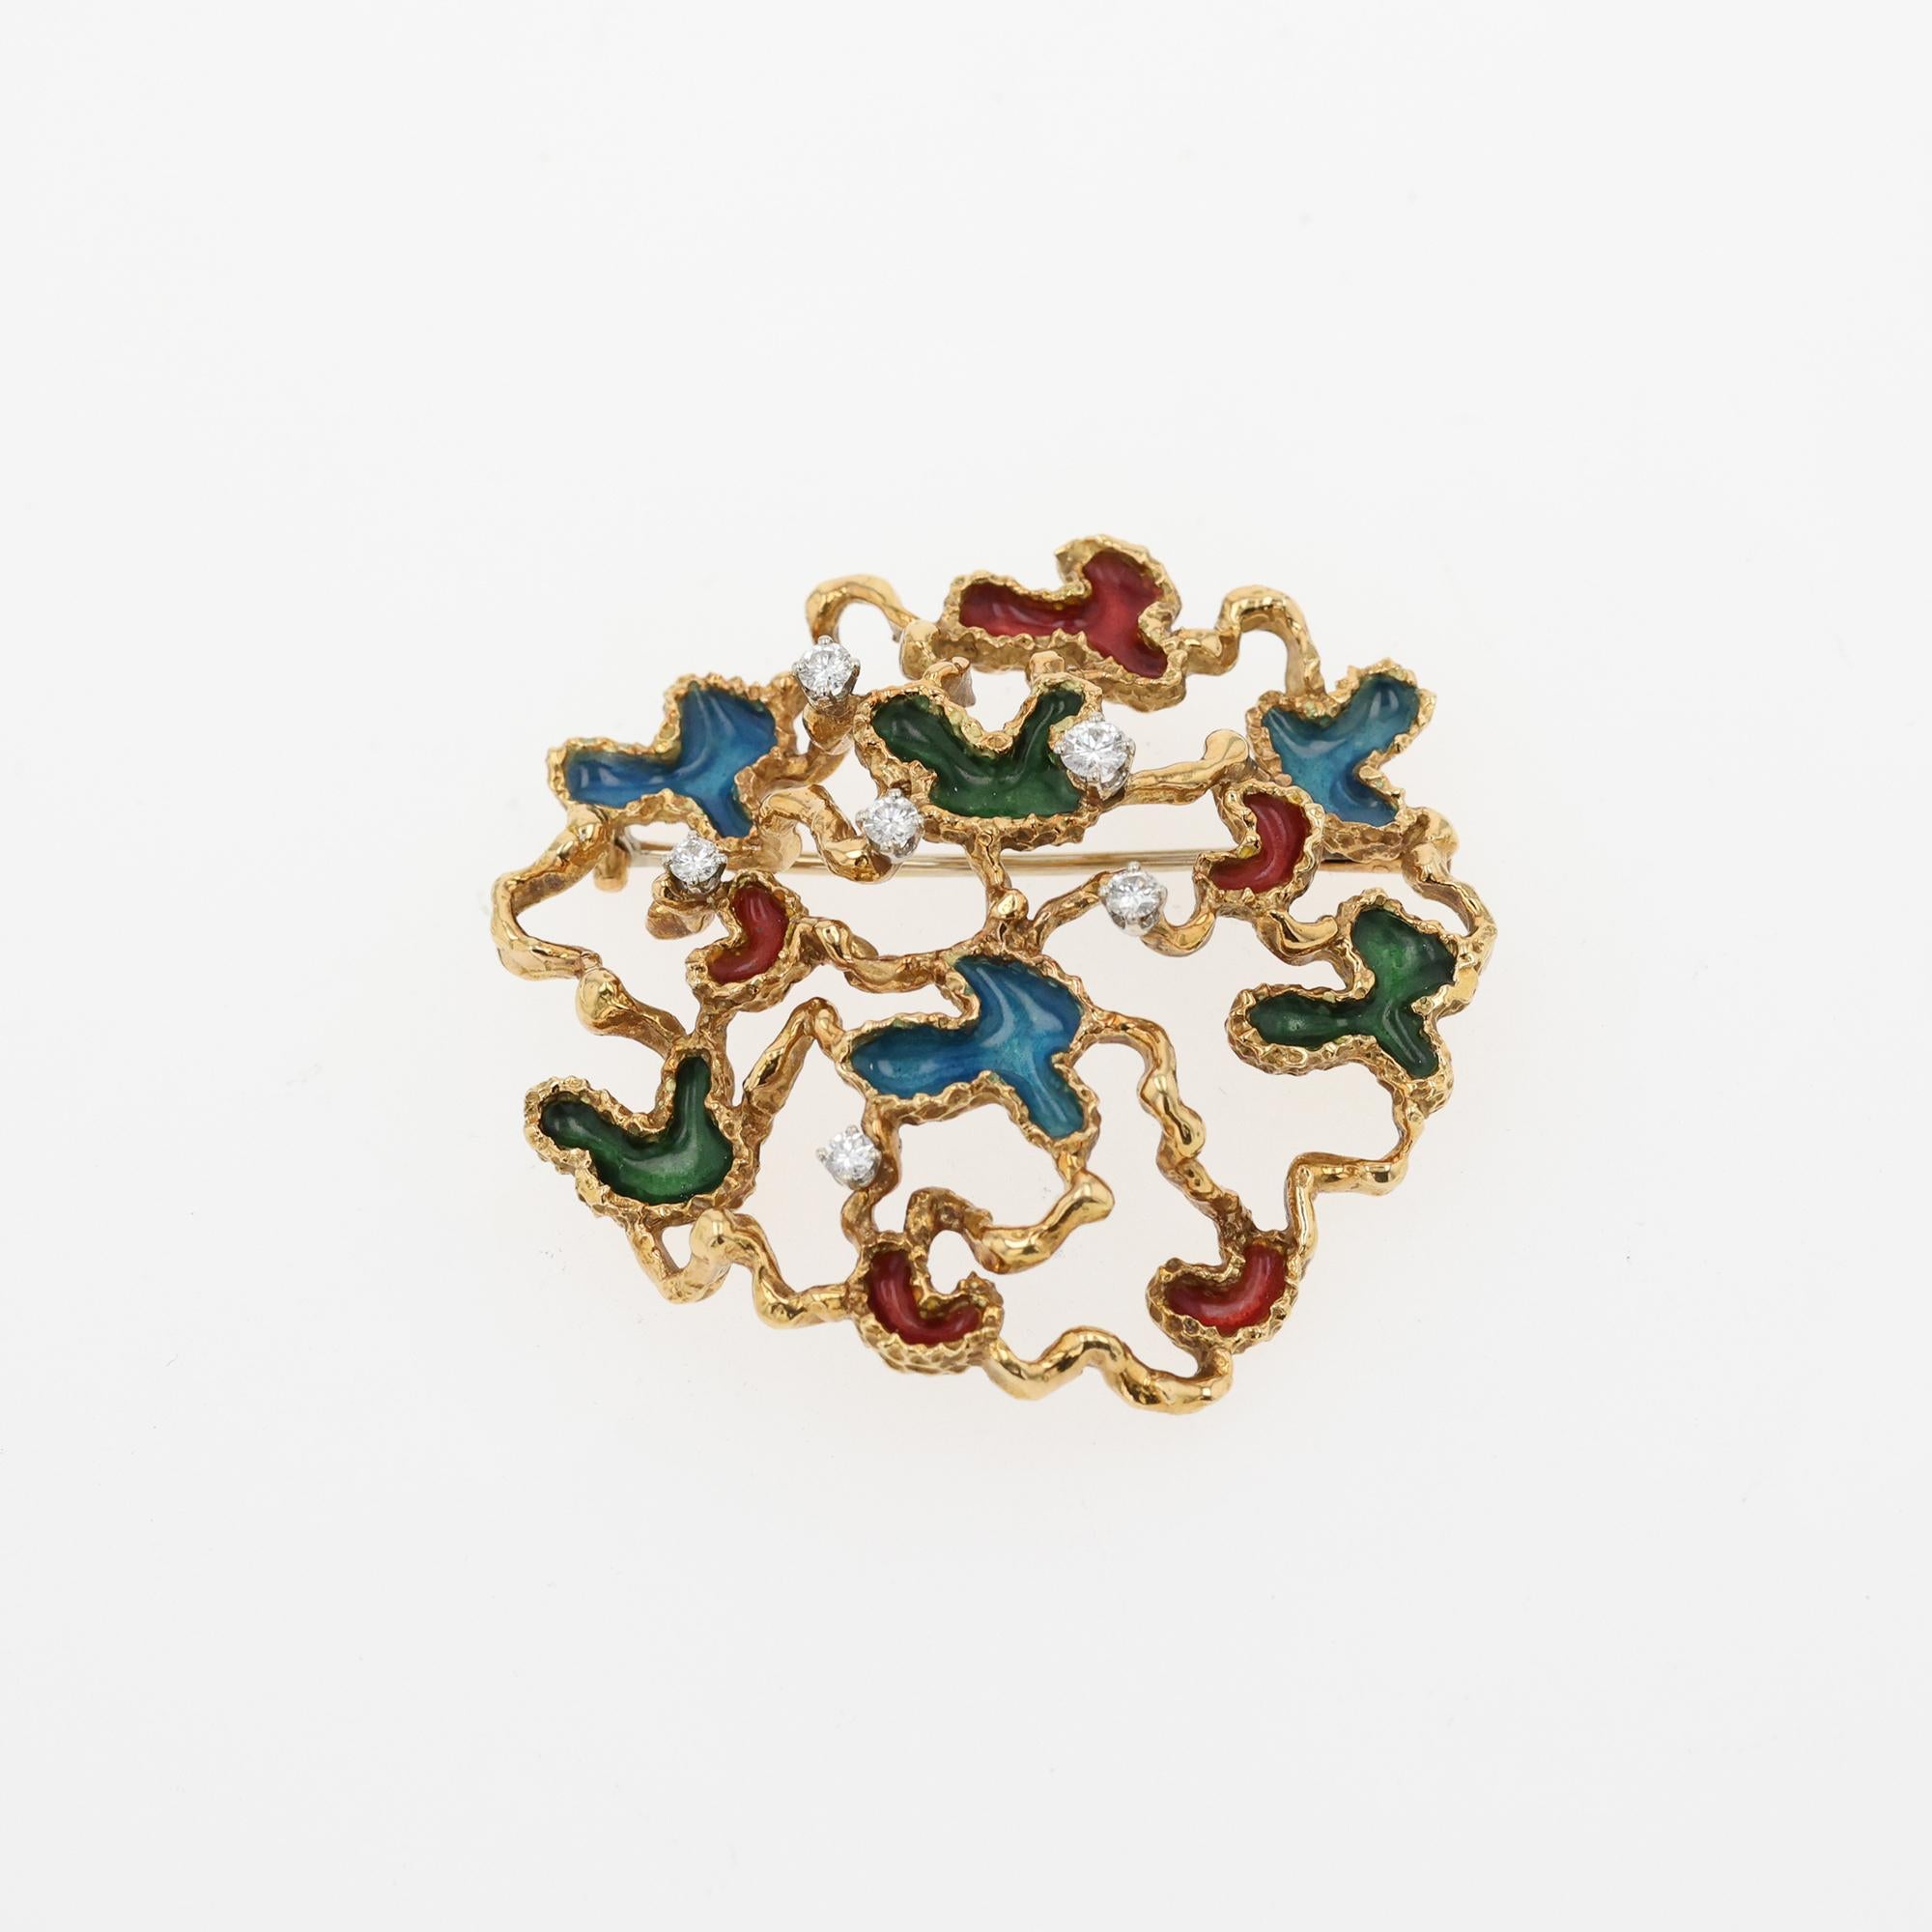 Vintage 18Y 1950's enamel brooch with 6 RBC=.35dwt approximate prong set.
Pin has free-form shape with enamel work in colors green, red, and blue with
textured finish. Standard pin closure. 13.2 dwt.